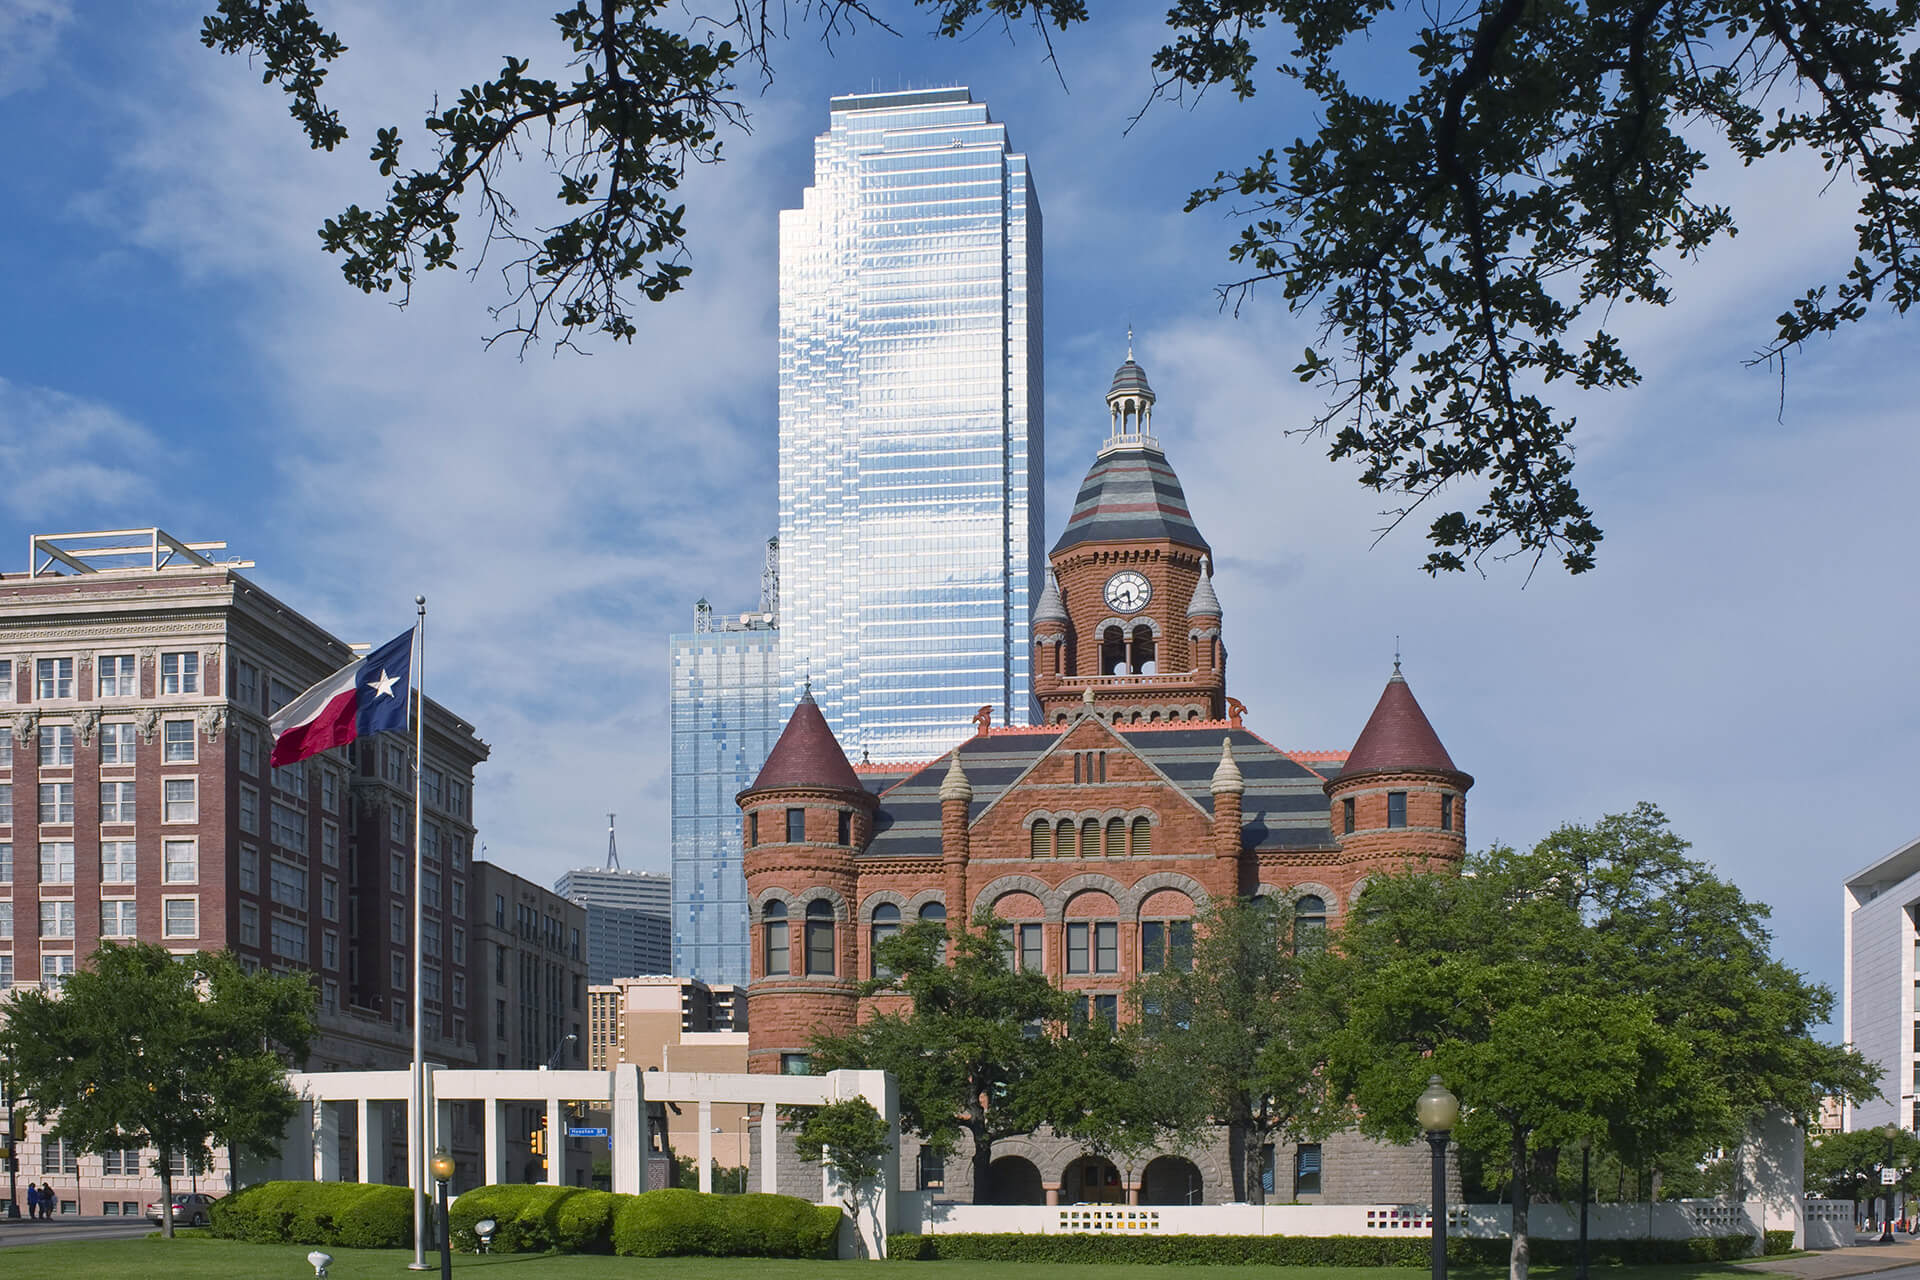  Dallas County Courthouse and Dealey Plaza